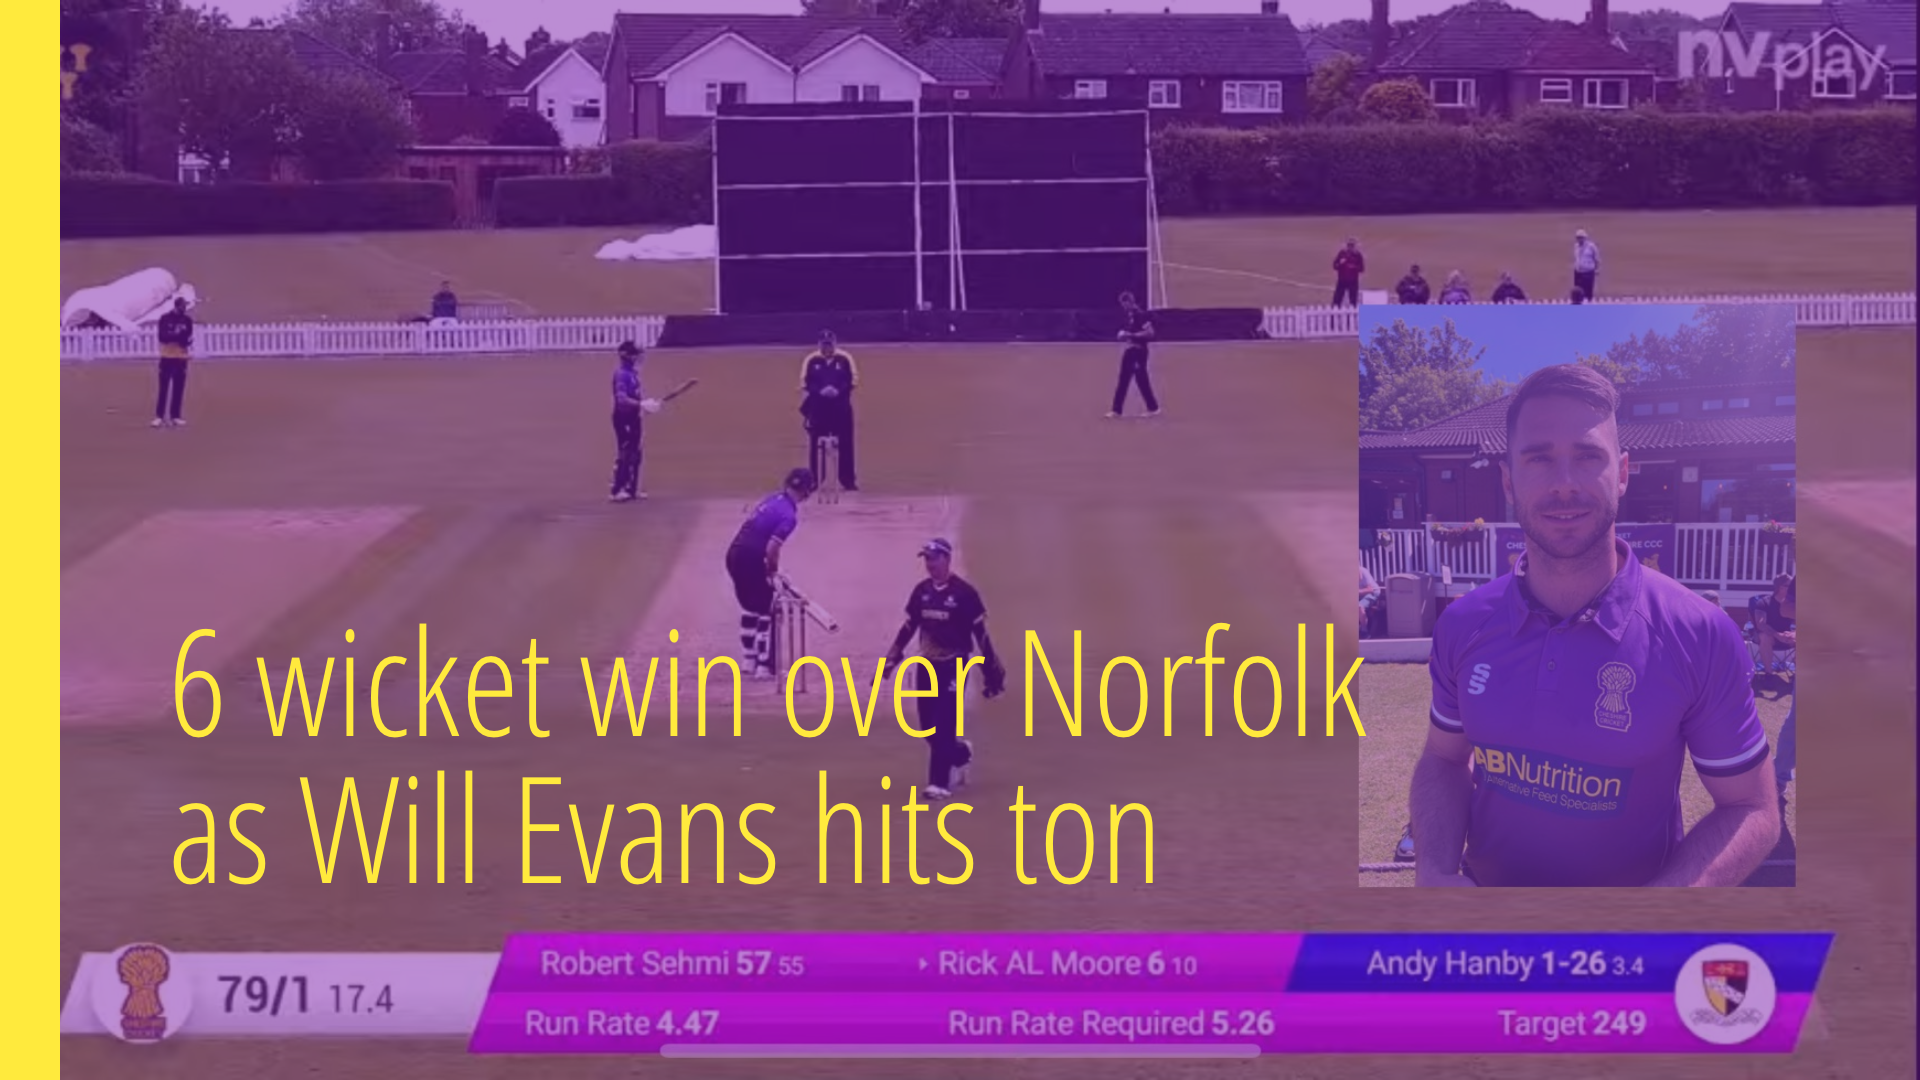 Evans hits 103* as Cheshire beat Norfolk by 6 wickets